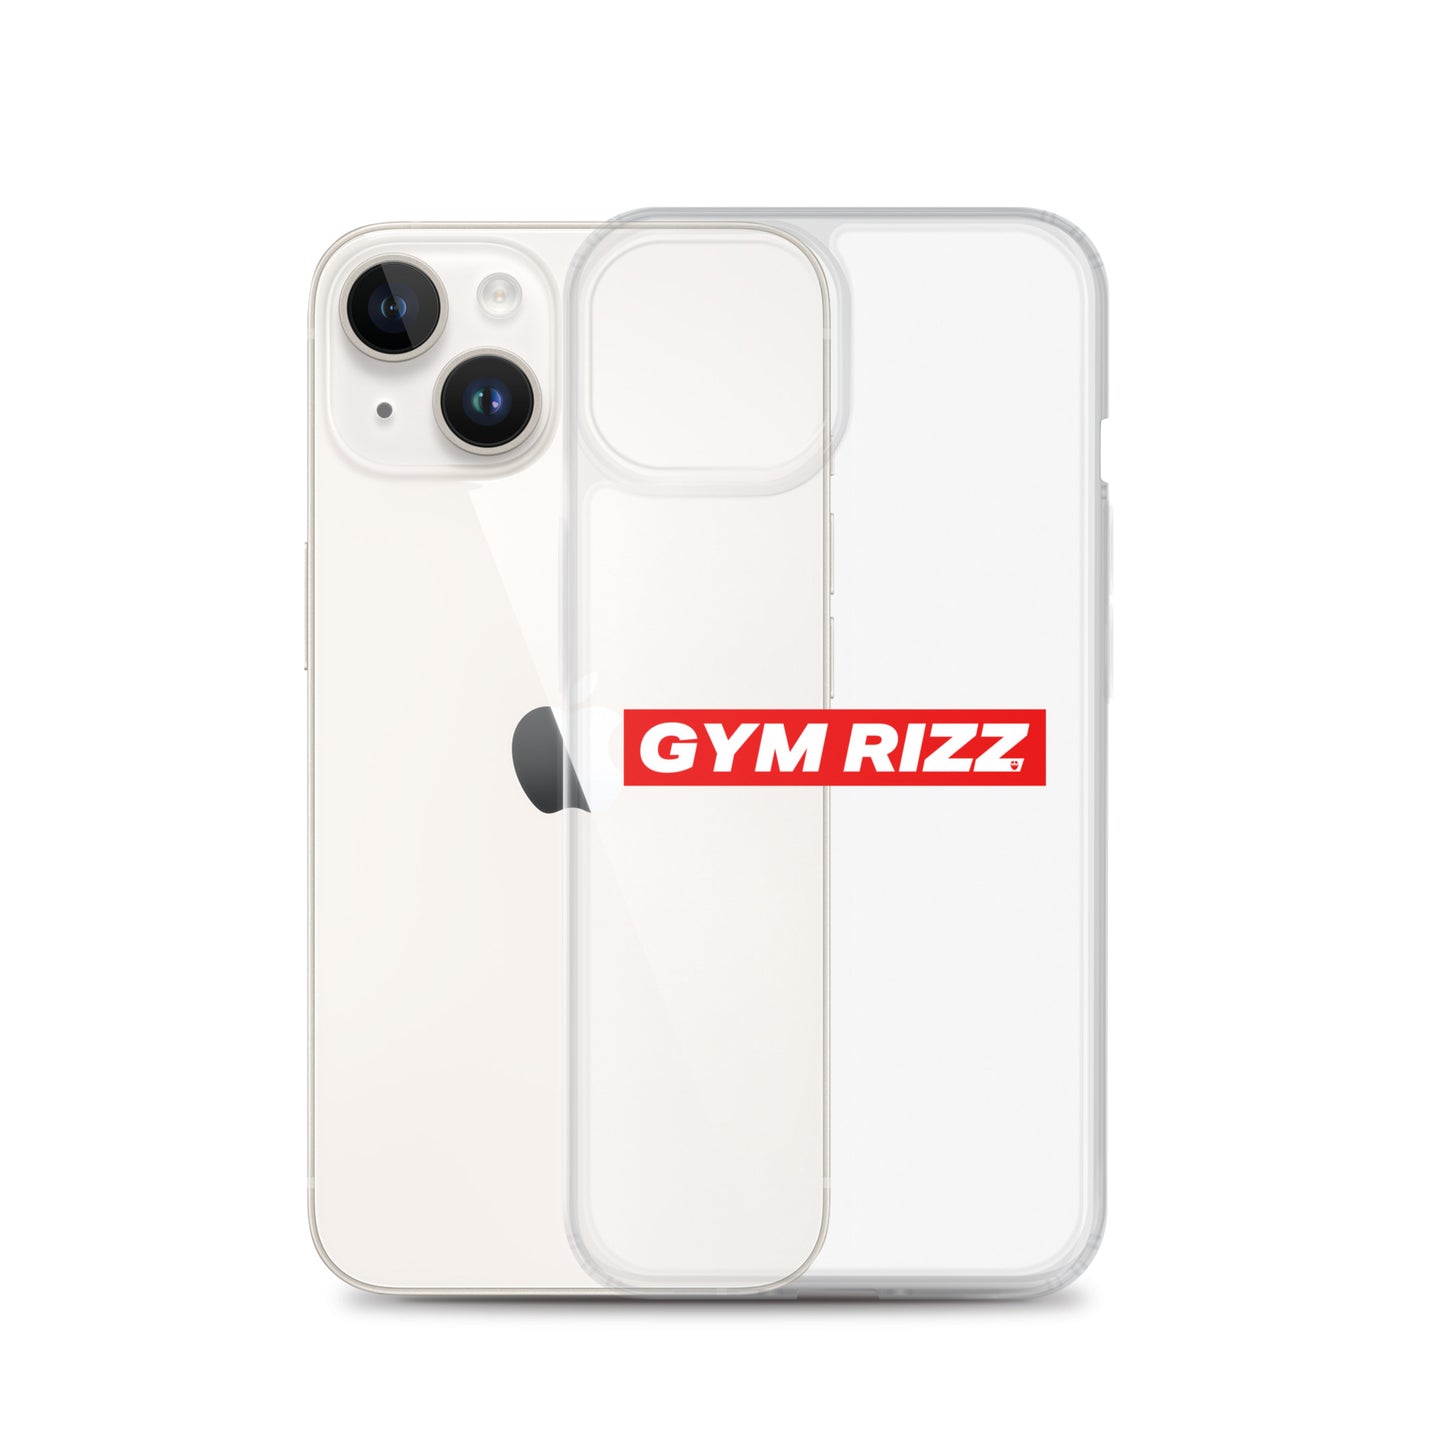 Gym Rizz iPhone Case